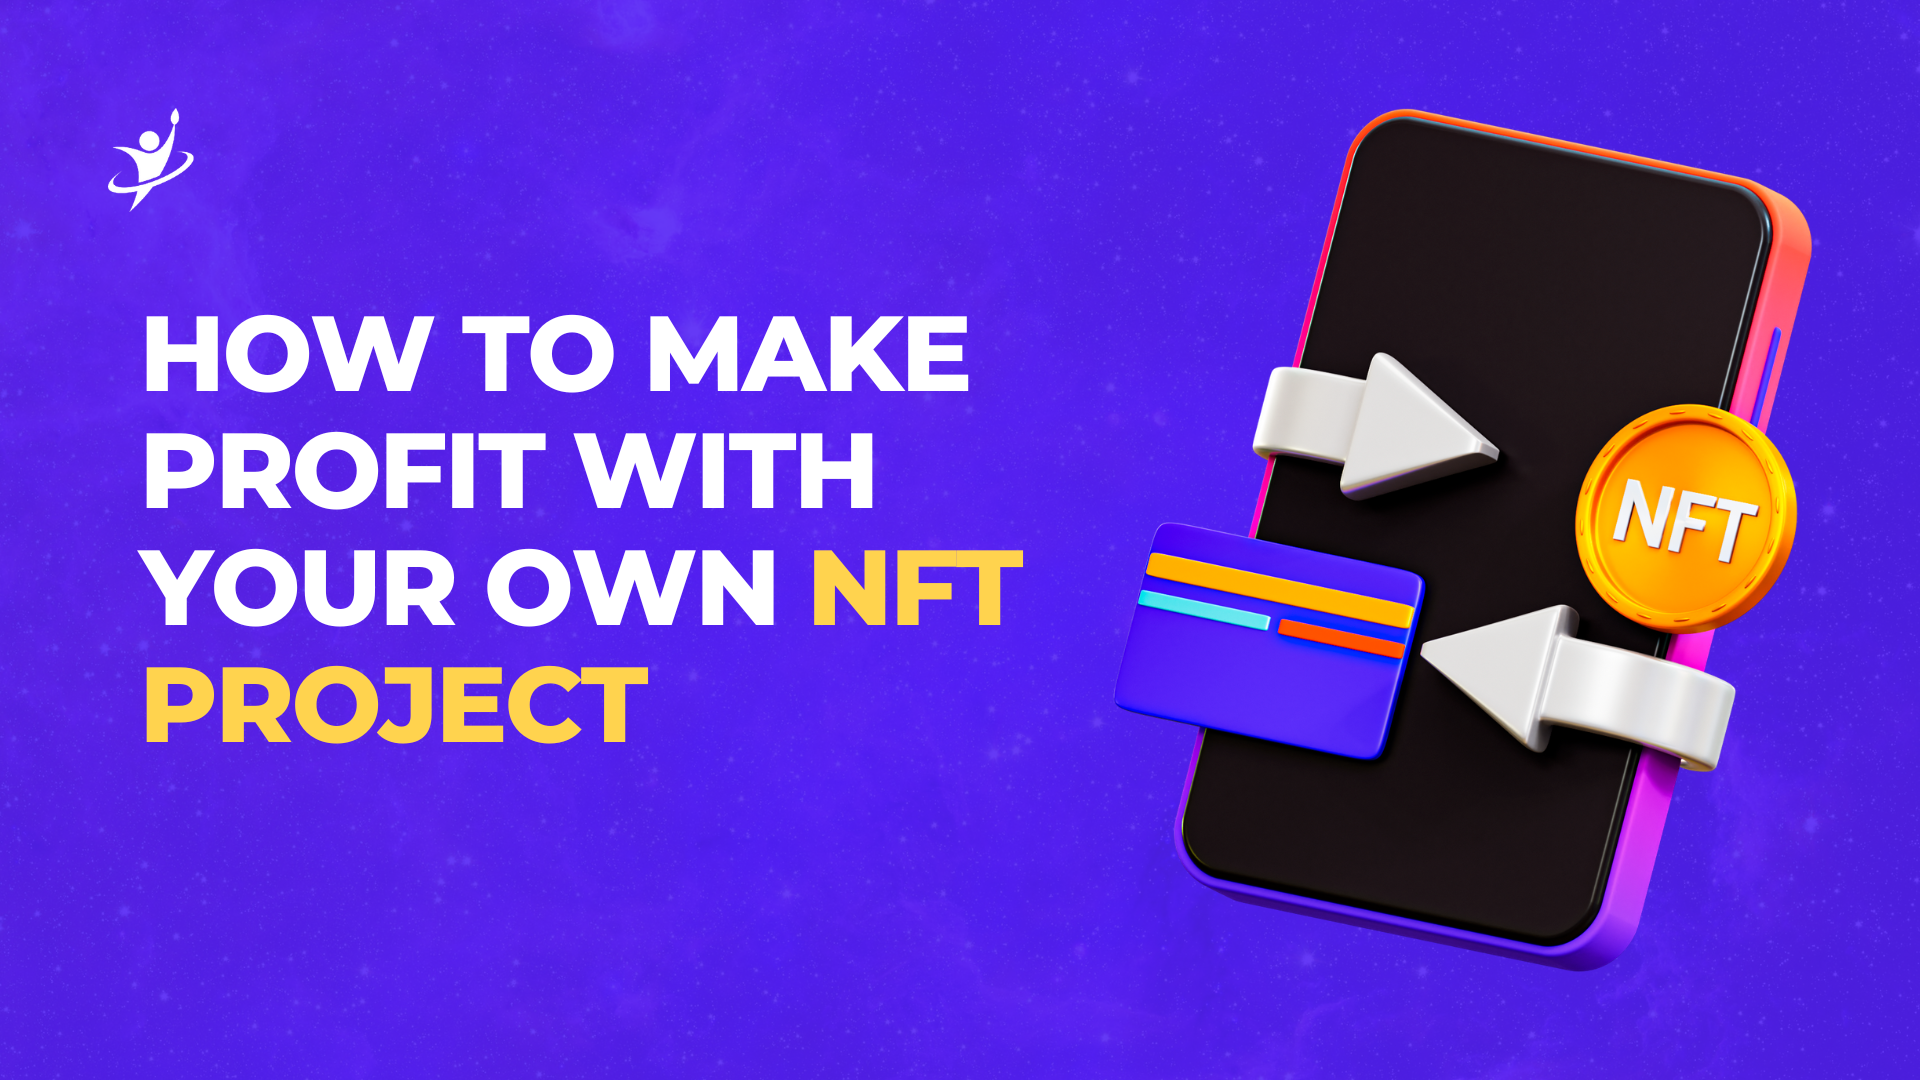 How to make profit with your own NFT project